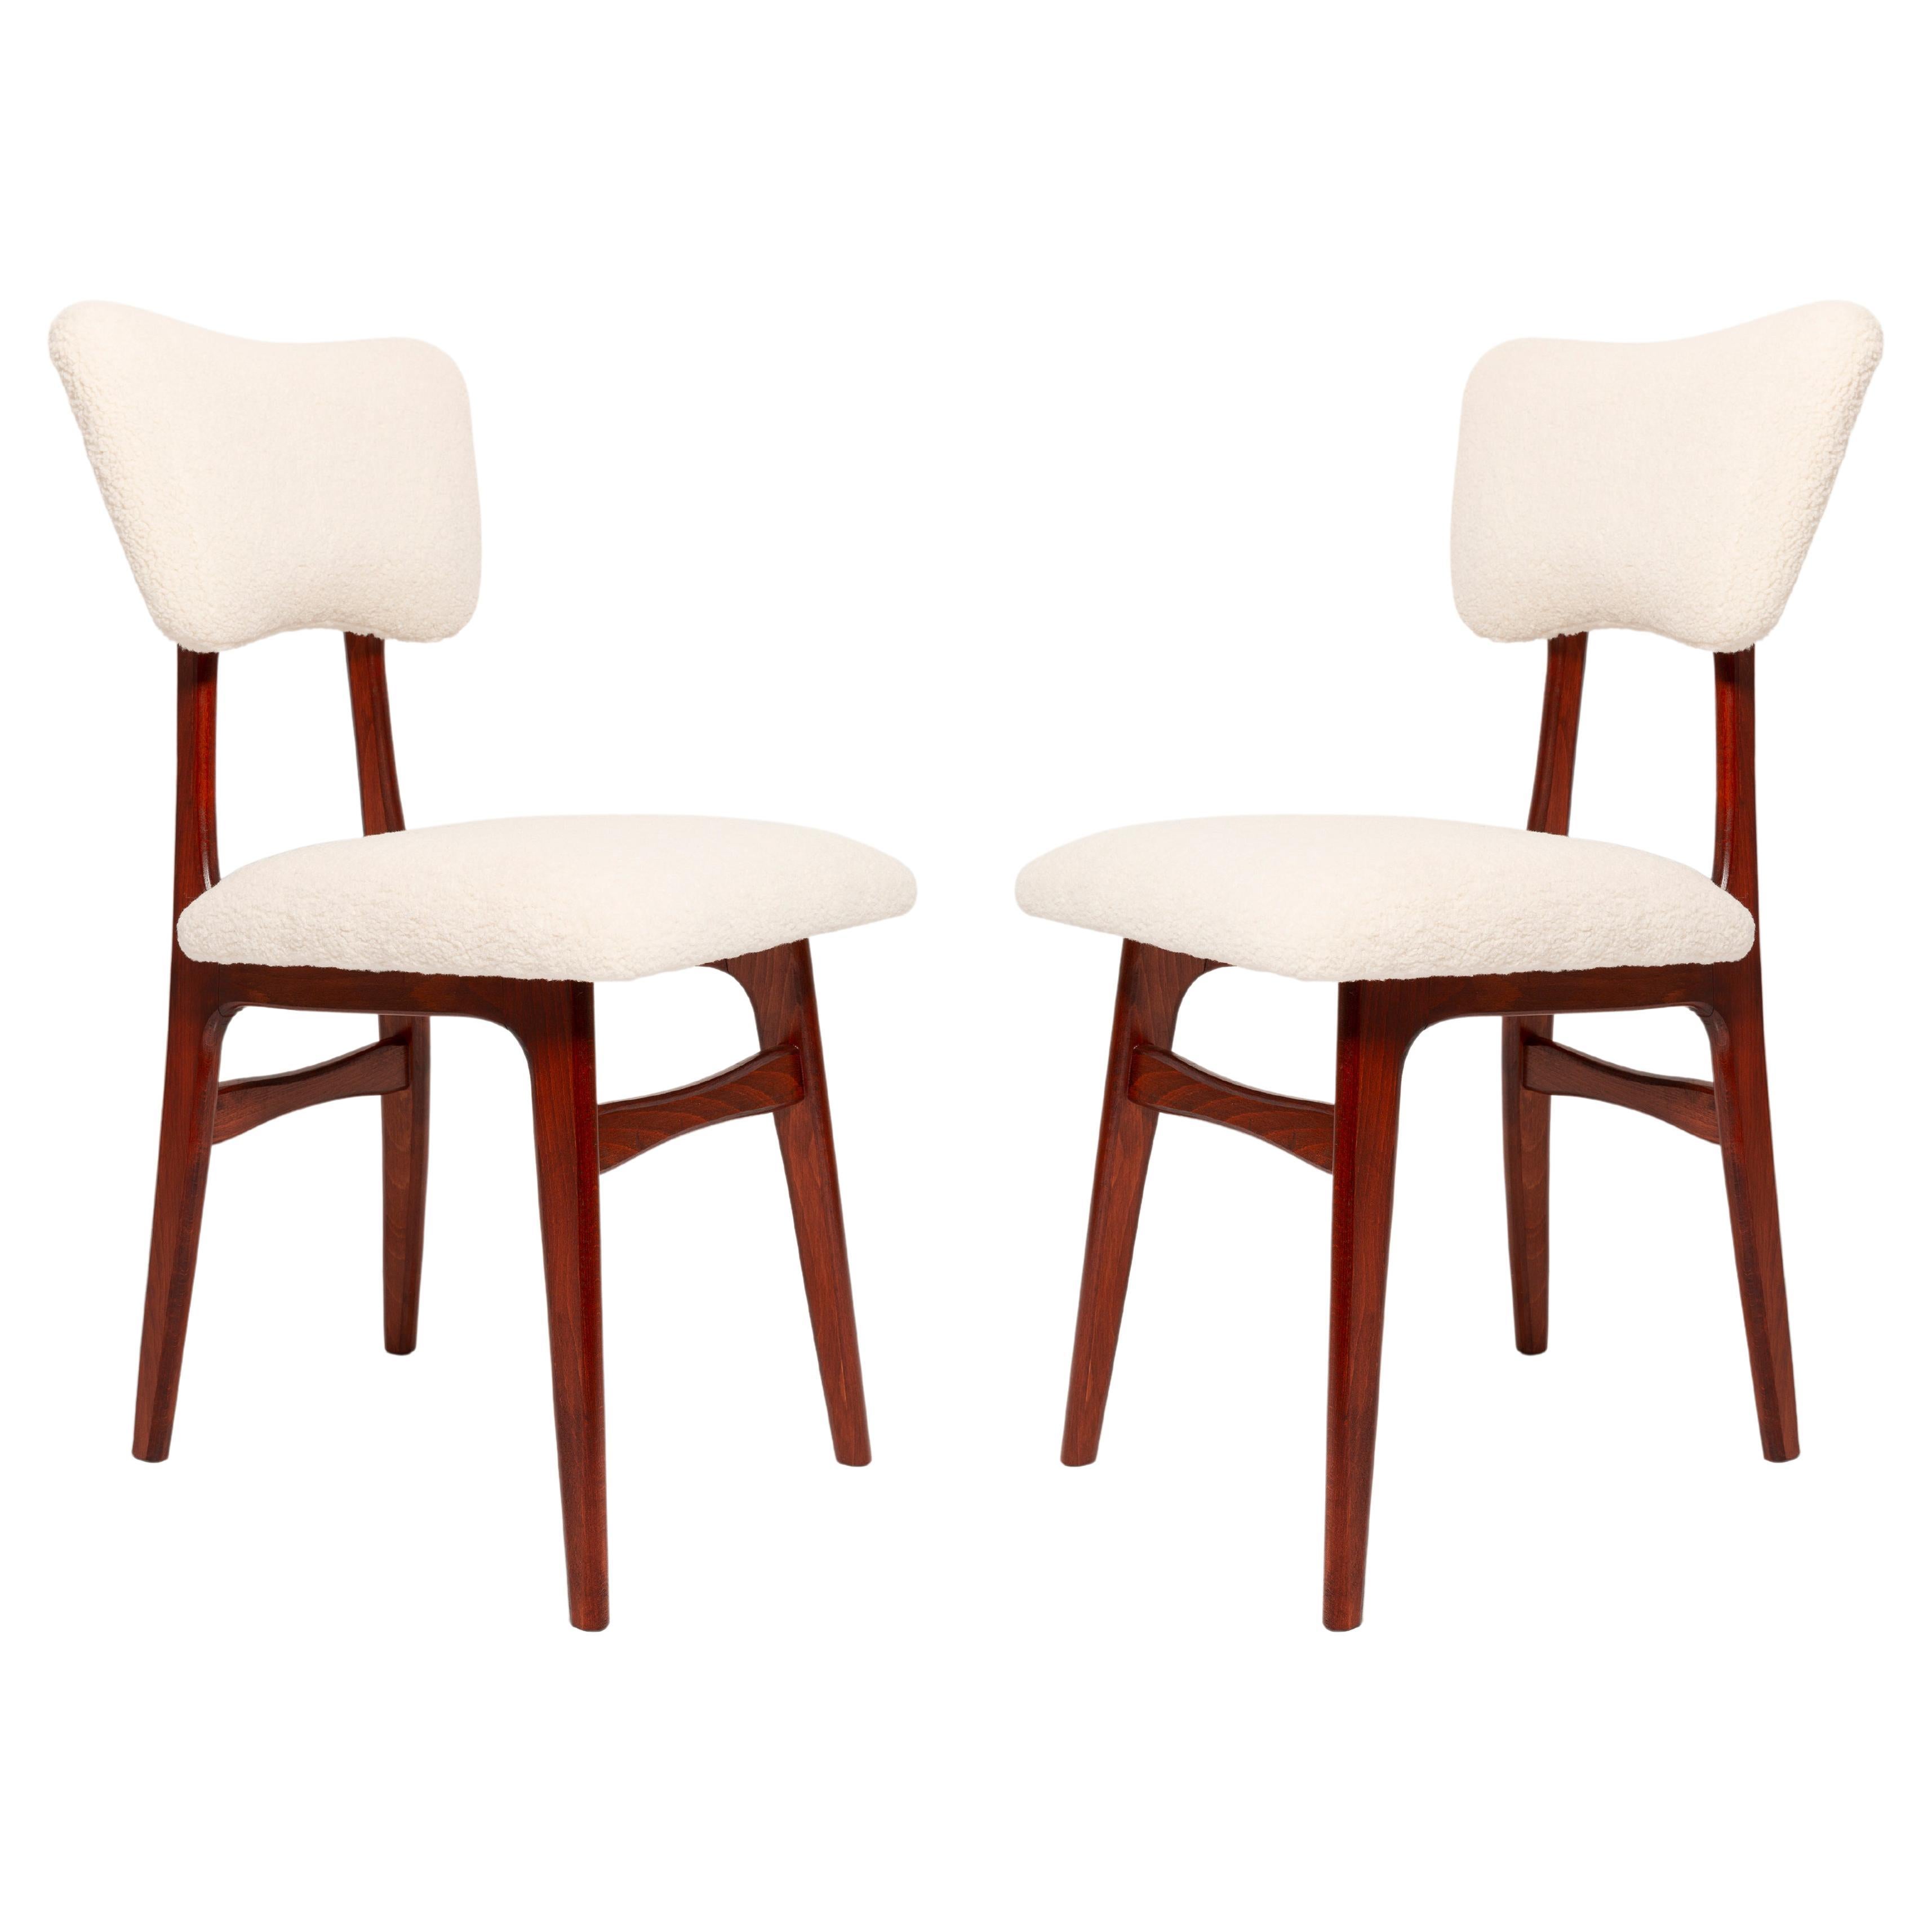 Two 20th Century Chairs in Light Creme and Cherry Wood Boucle, Europe, 1960s For Sale